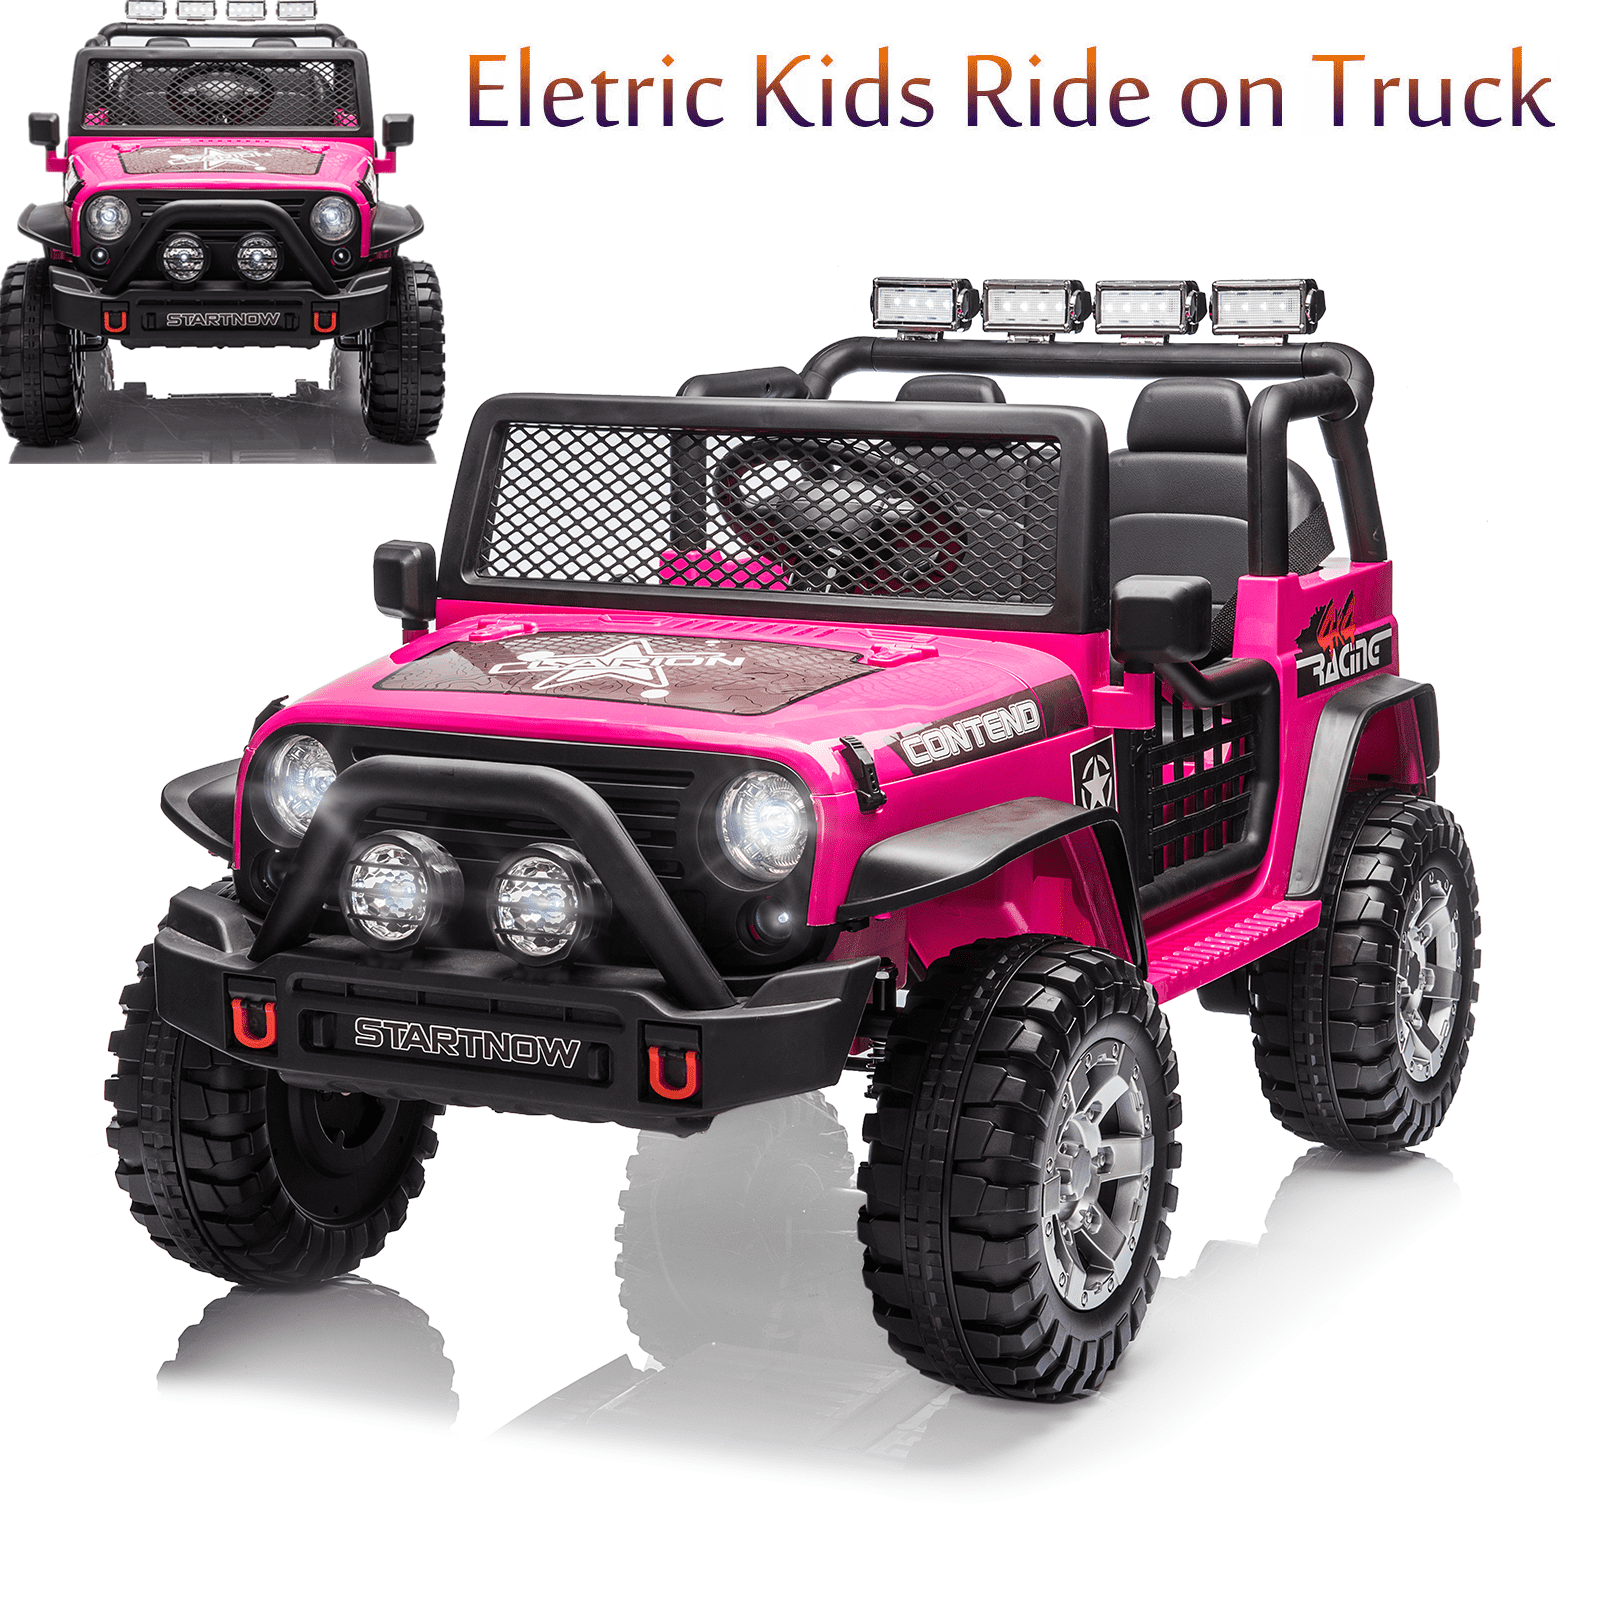 Dazone 12V Kids Ride on Jeep Car, Electric 2 Seats Off-road Jeep Ride on Truck Vehicle with Remote Control, LED Lights, MP3 Music, Pink - image 1 of 8